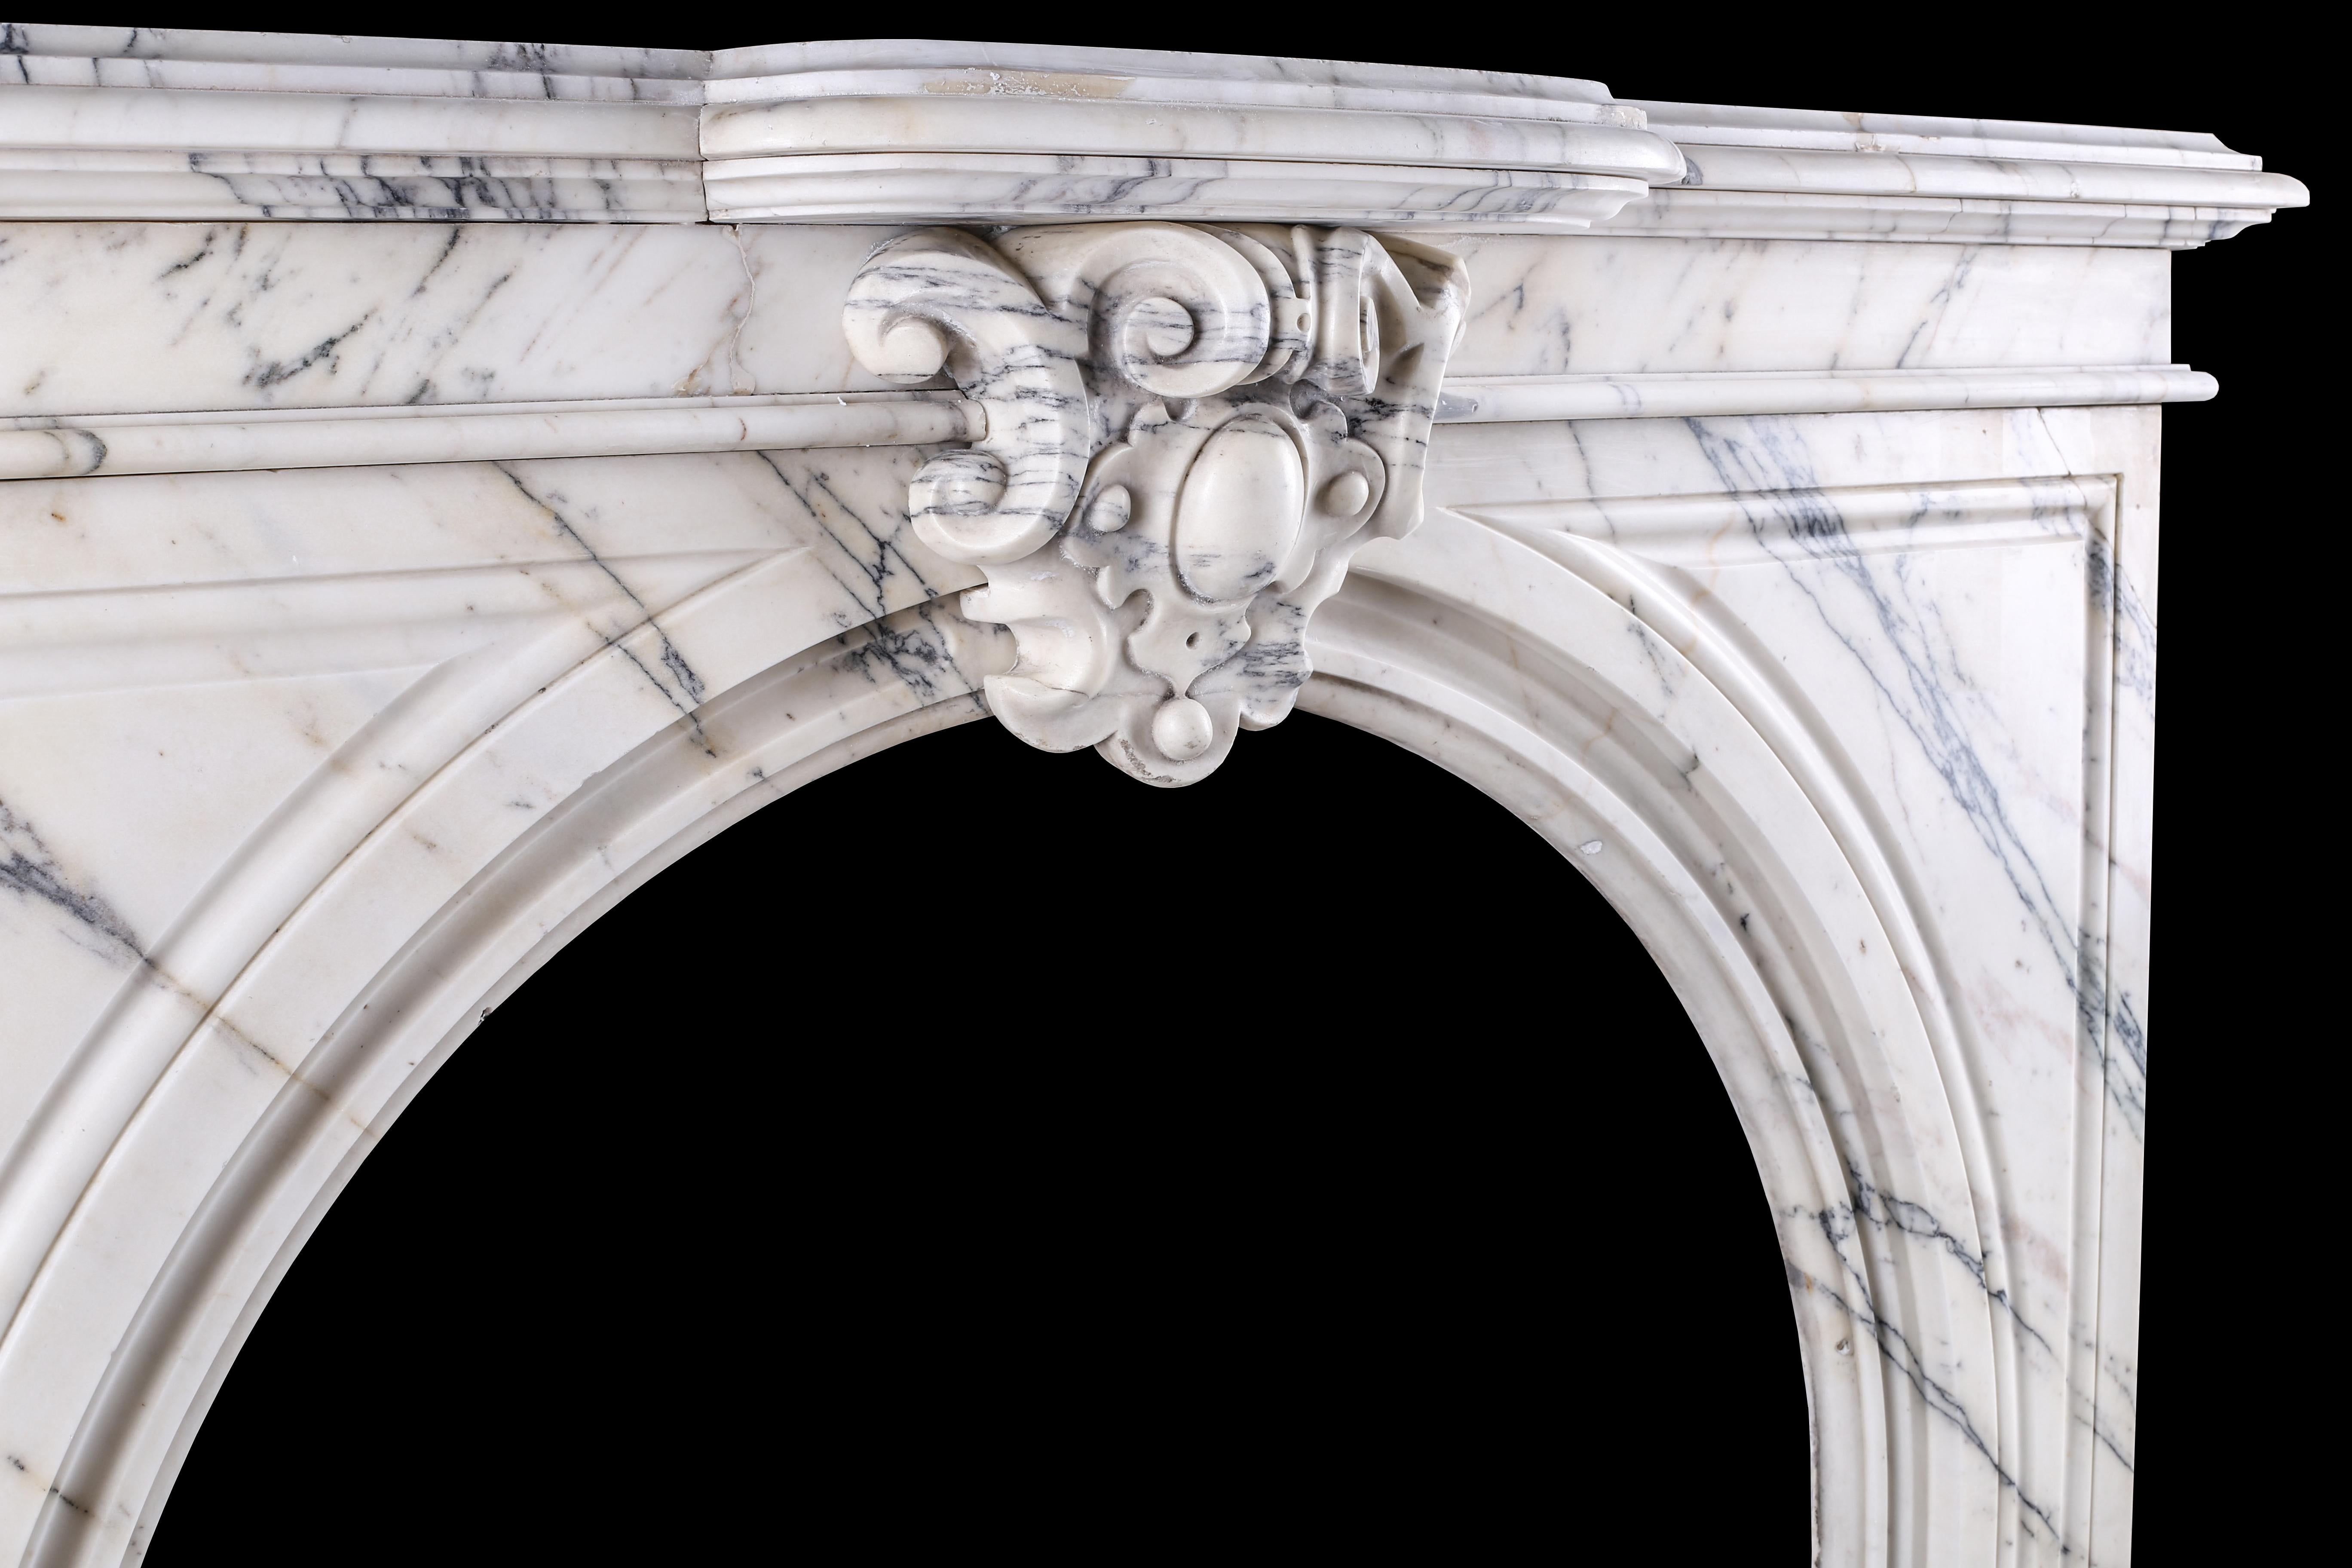 Elegant Arched Pavonazza Marble Antique Chimneypiece, Belgian Mid-19th Century For Sale 1